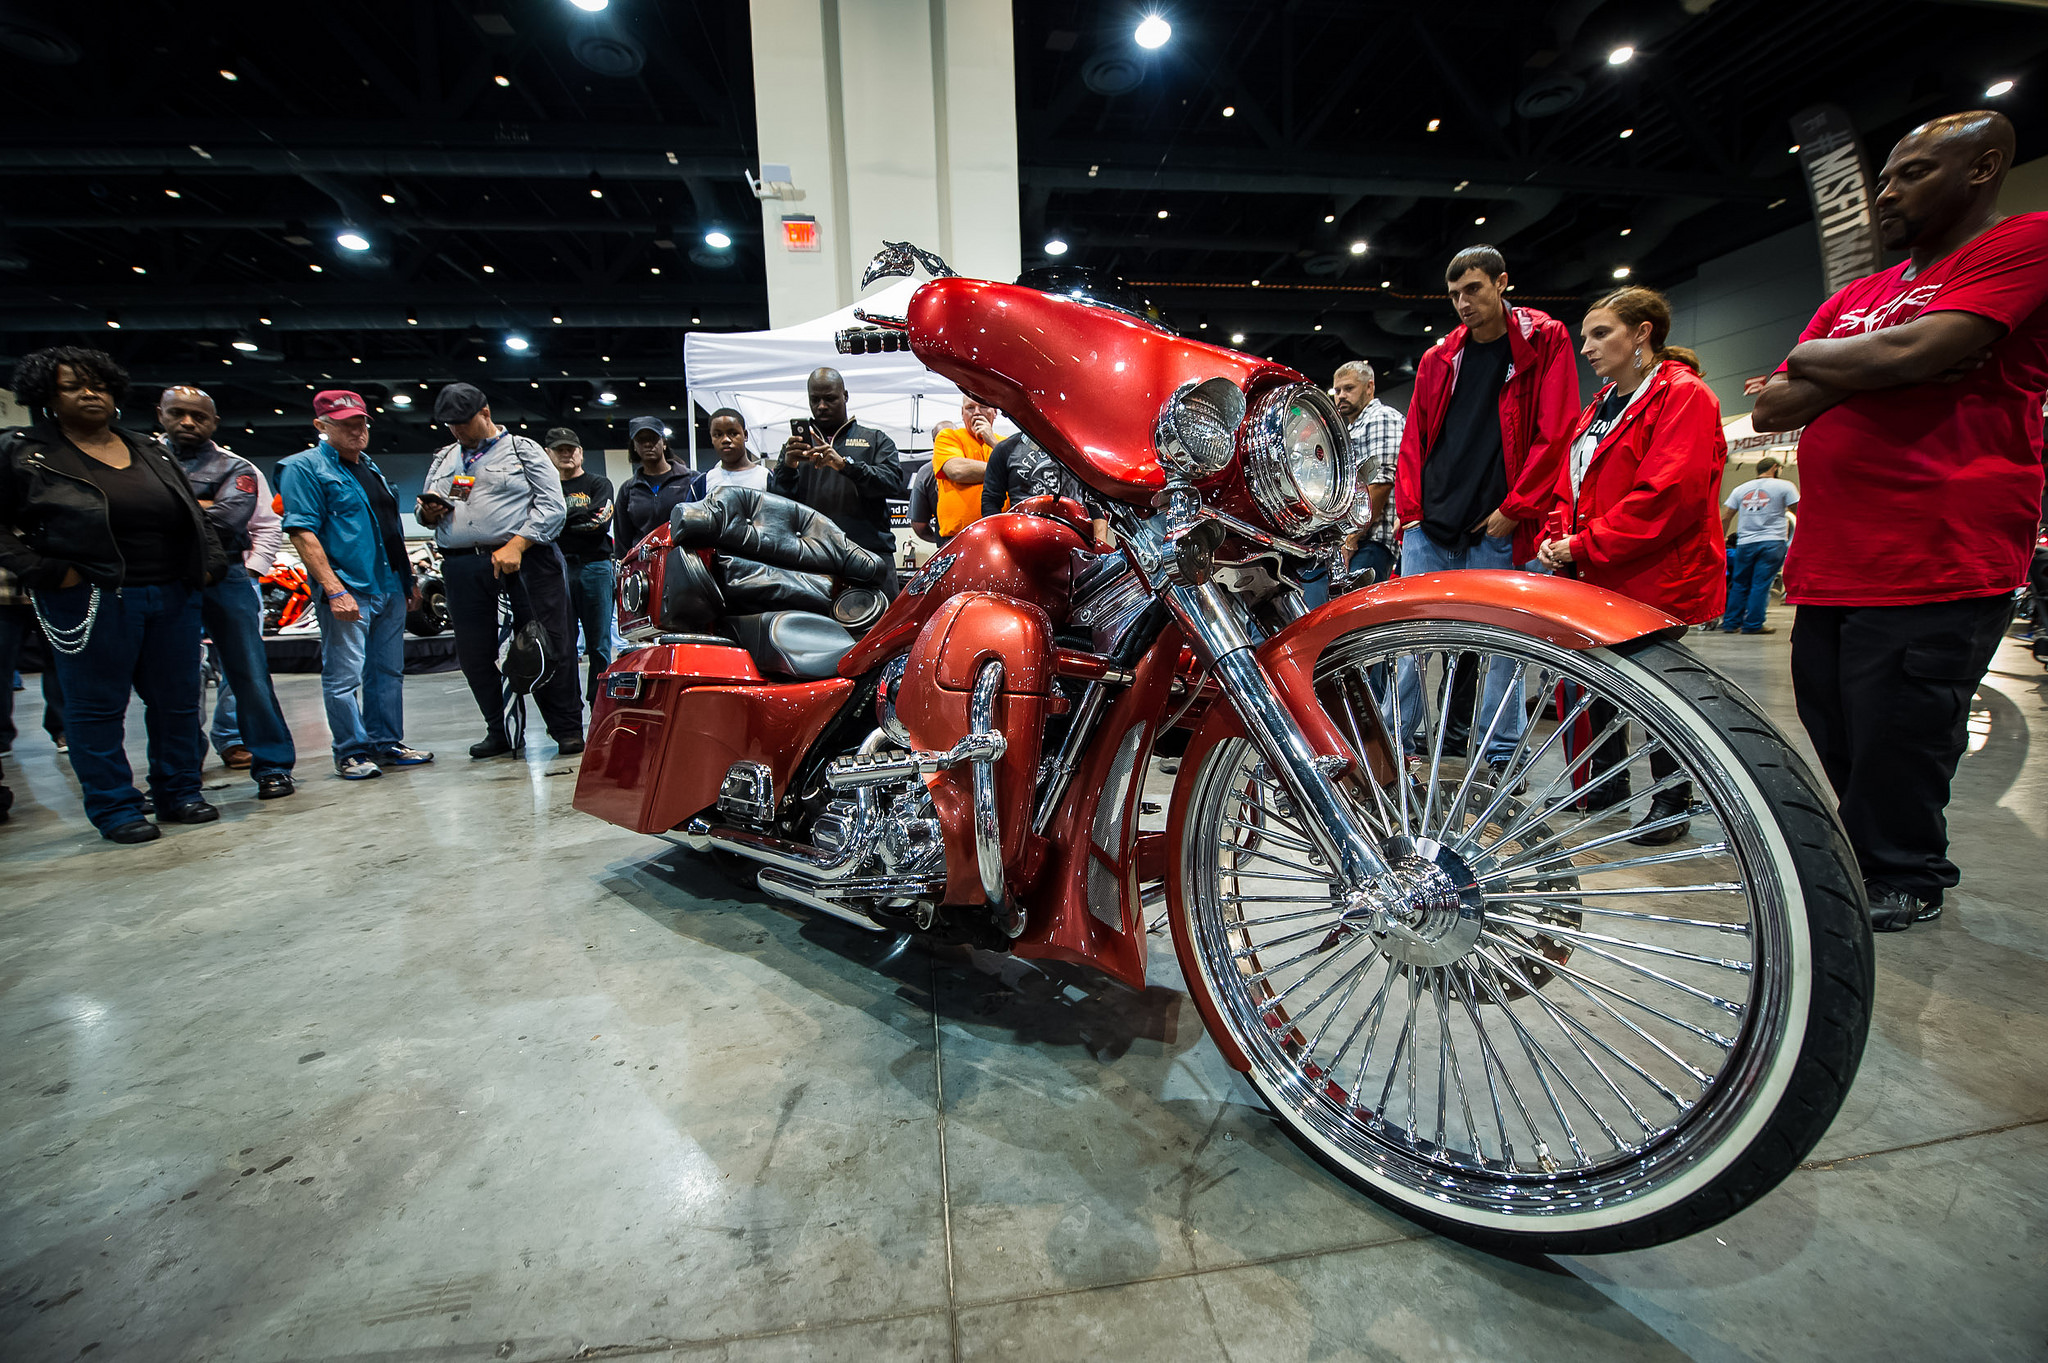 The 12th Annual Ray Price Capital City Bikefest returns to downtown Raleigh, Sept. 23-25, 2016, featuring the largest custom bike show on the east coast.